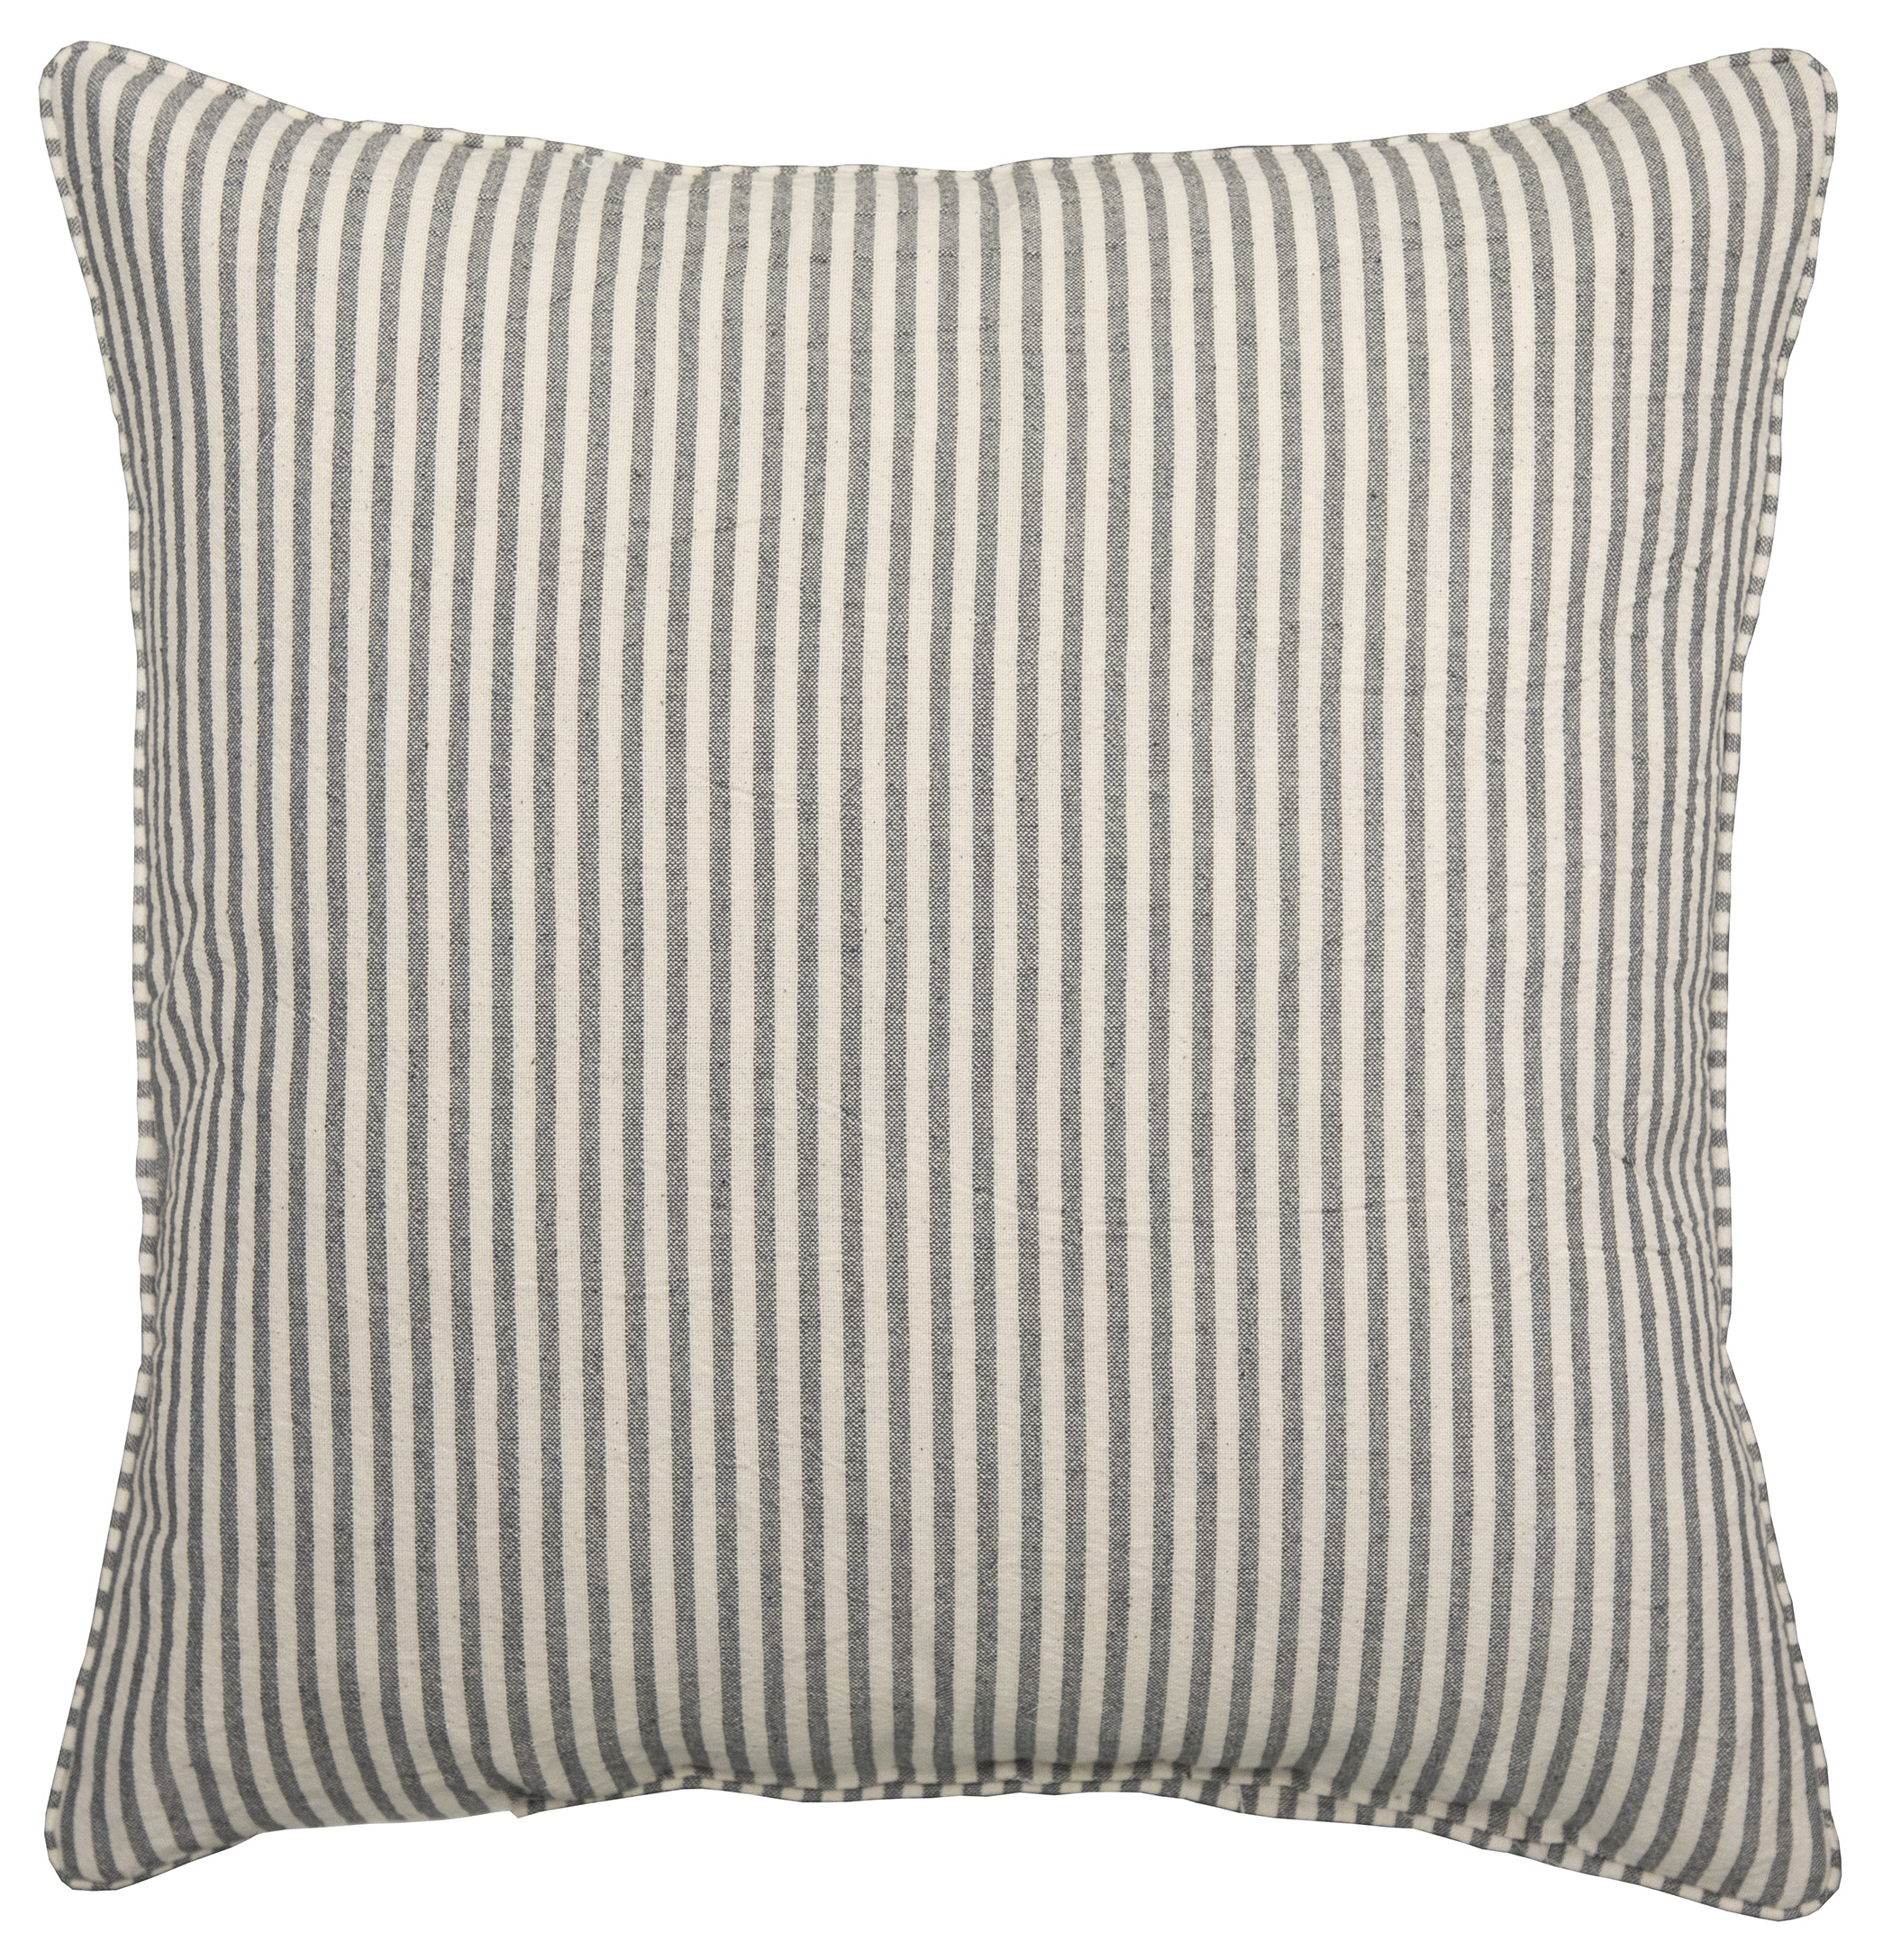 Mainstays Decorative Throw Pillow, Beyond Blessed Sentiment, Square, Grey, 18" x 18", 1Pack - image 5 of 5